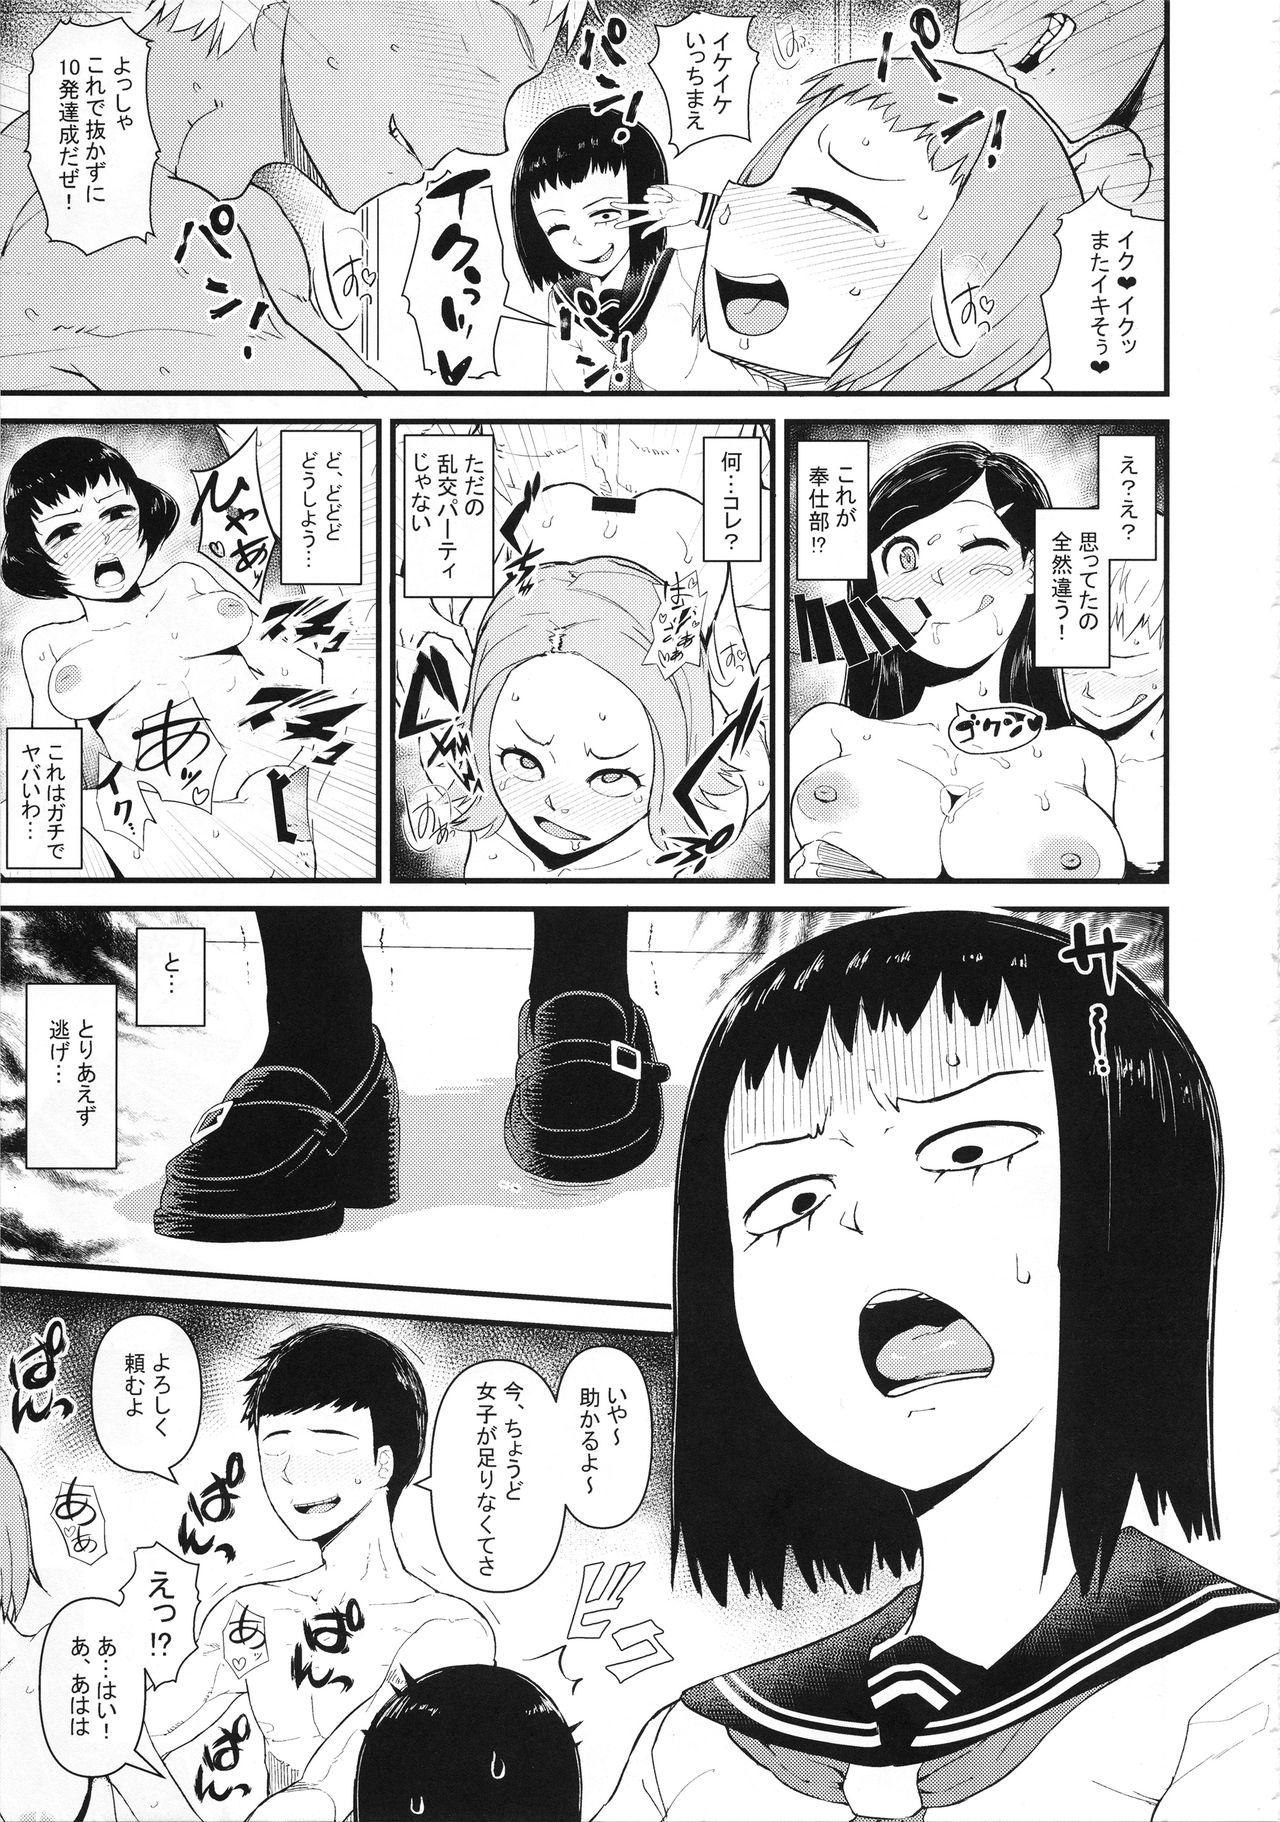 For Kurada Tome 100% - Mob psycho 100 For - Page 4